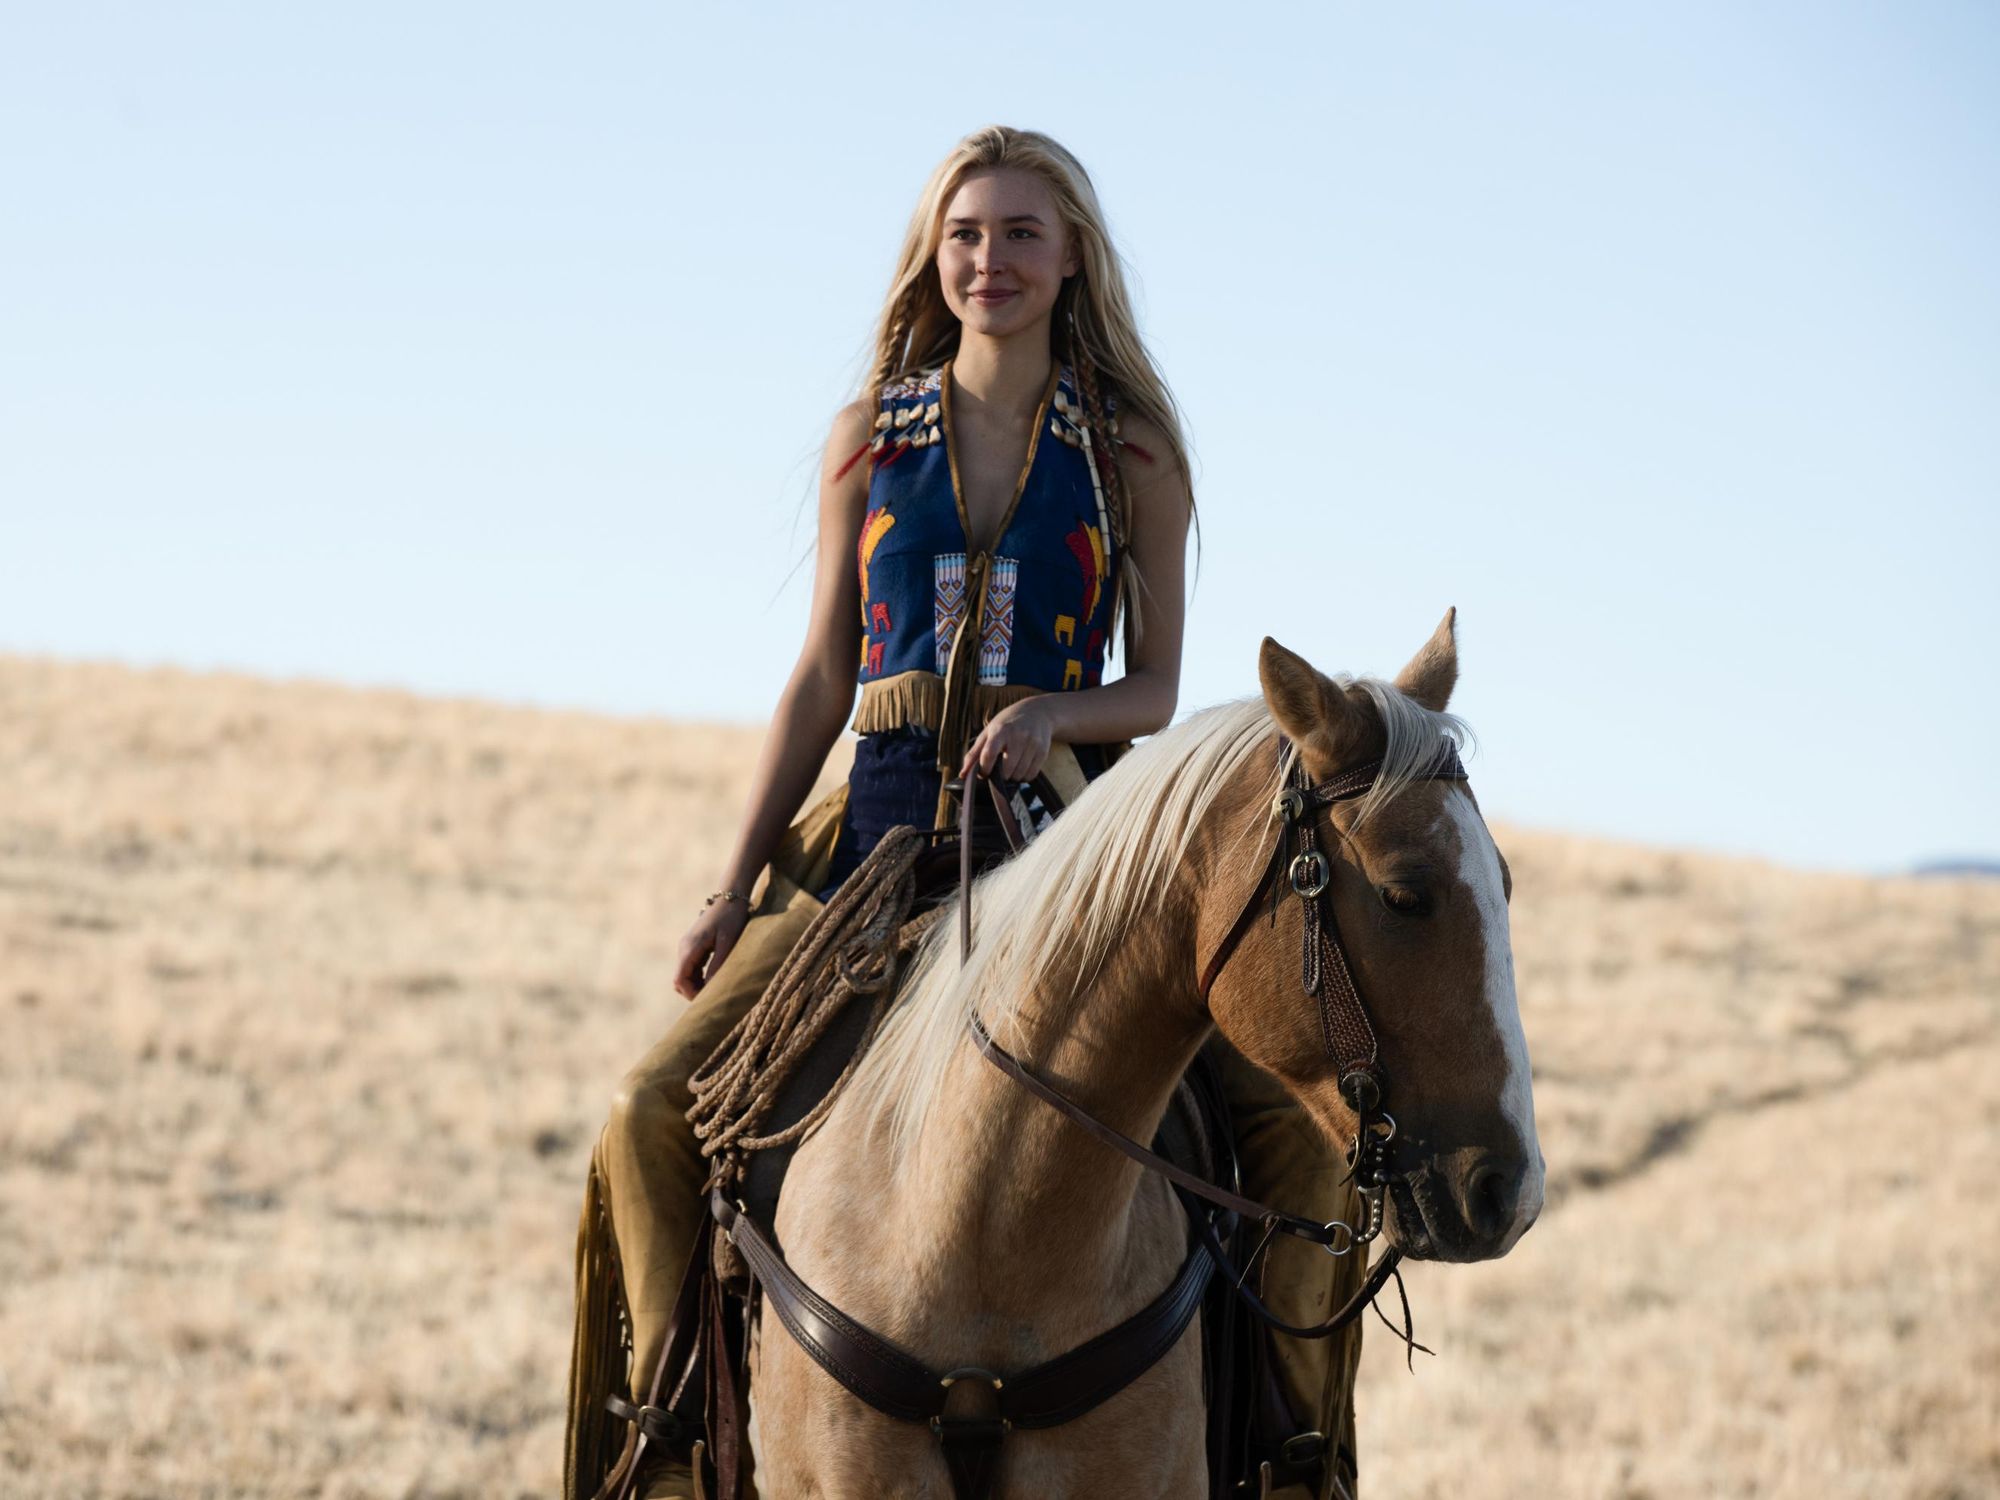 ​Isabel May as Elsa Dutton on horseback wearing yellow fringed chaps and a beaded blue, red, and yellow vest made for her by the Comanche